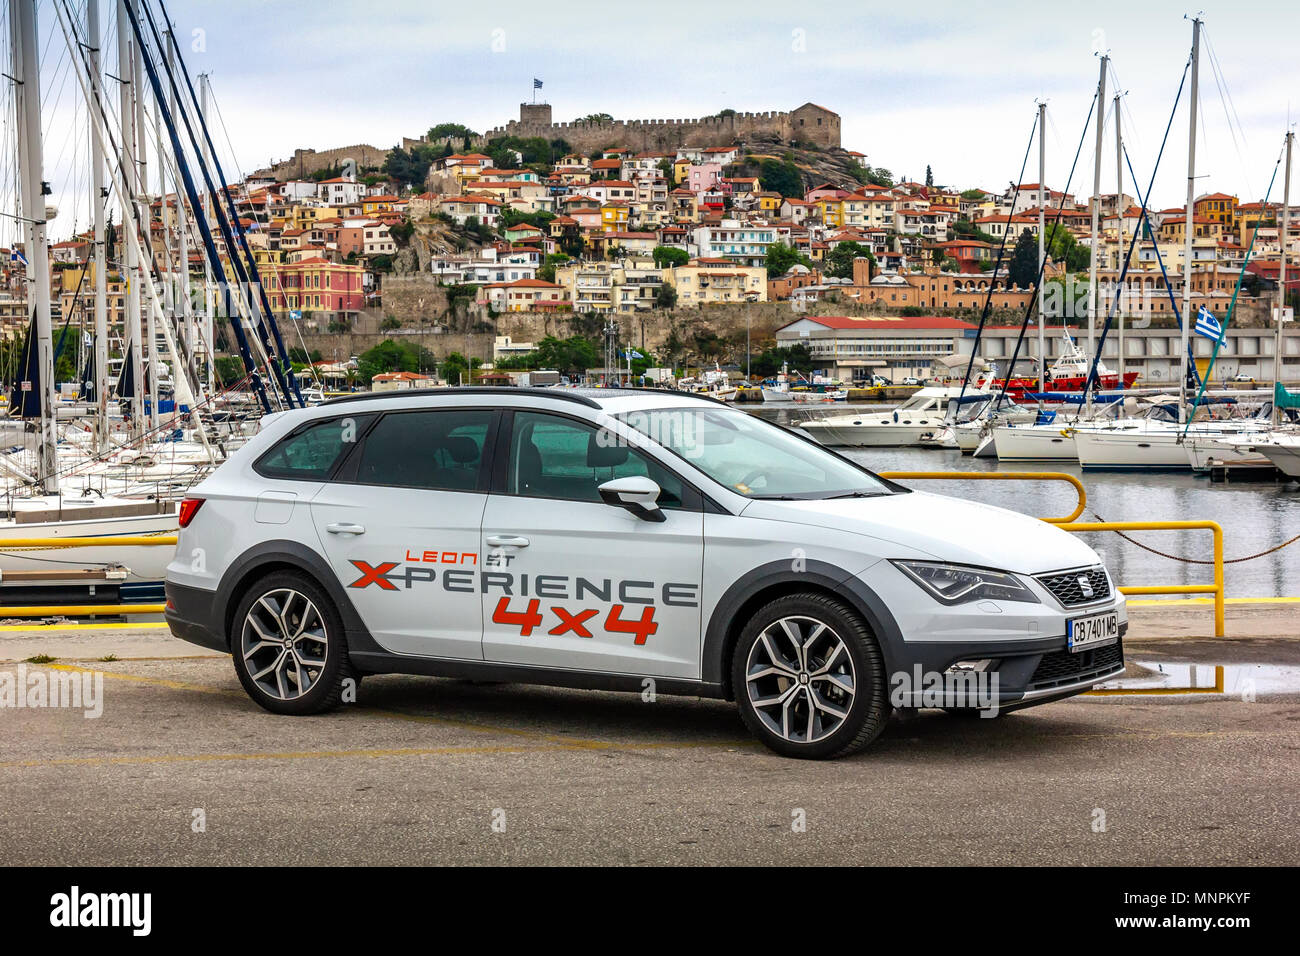 Seat new models cars situated on the coast of Kavala, Greece. Leon Xperience 1.8TSI 4Drive. Stock Photo